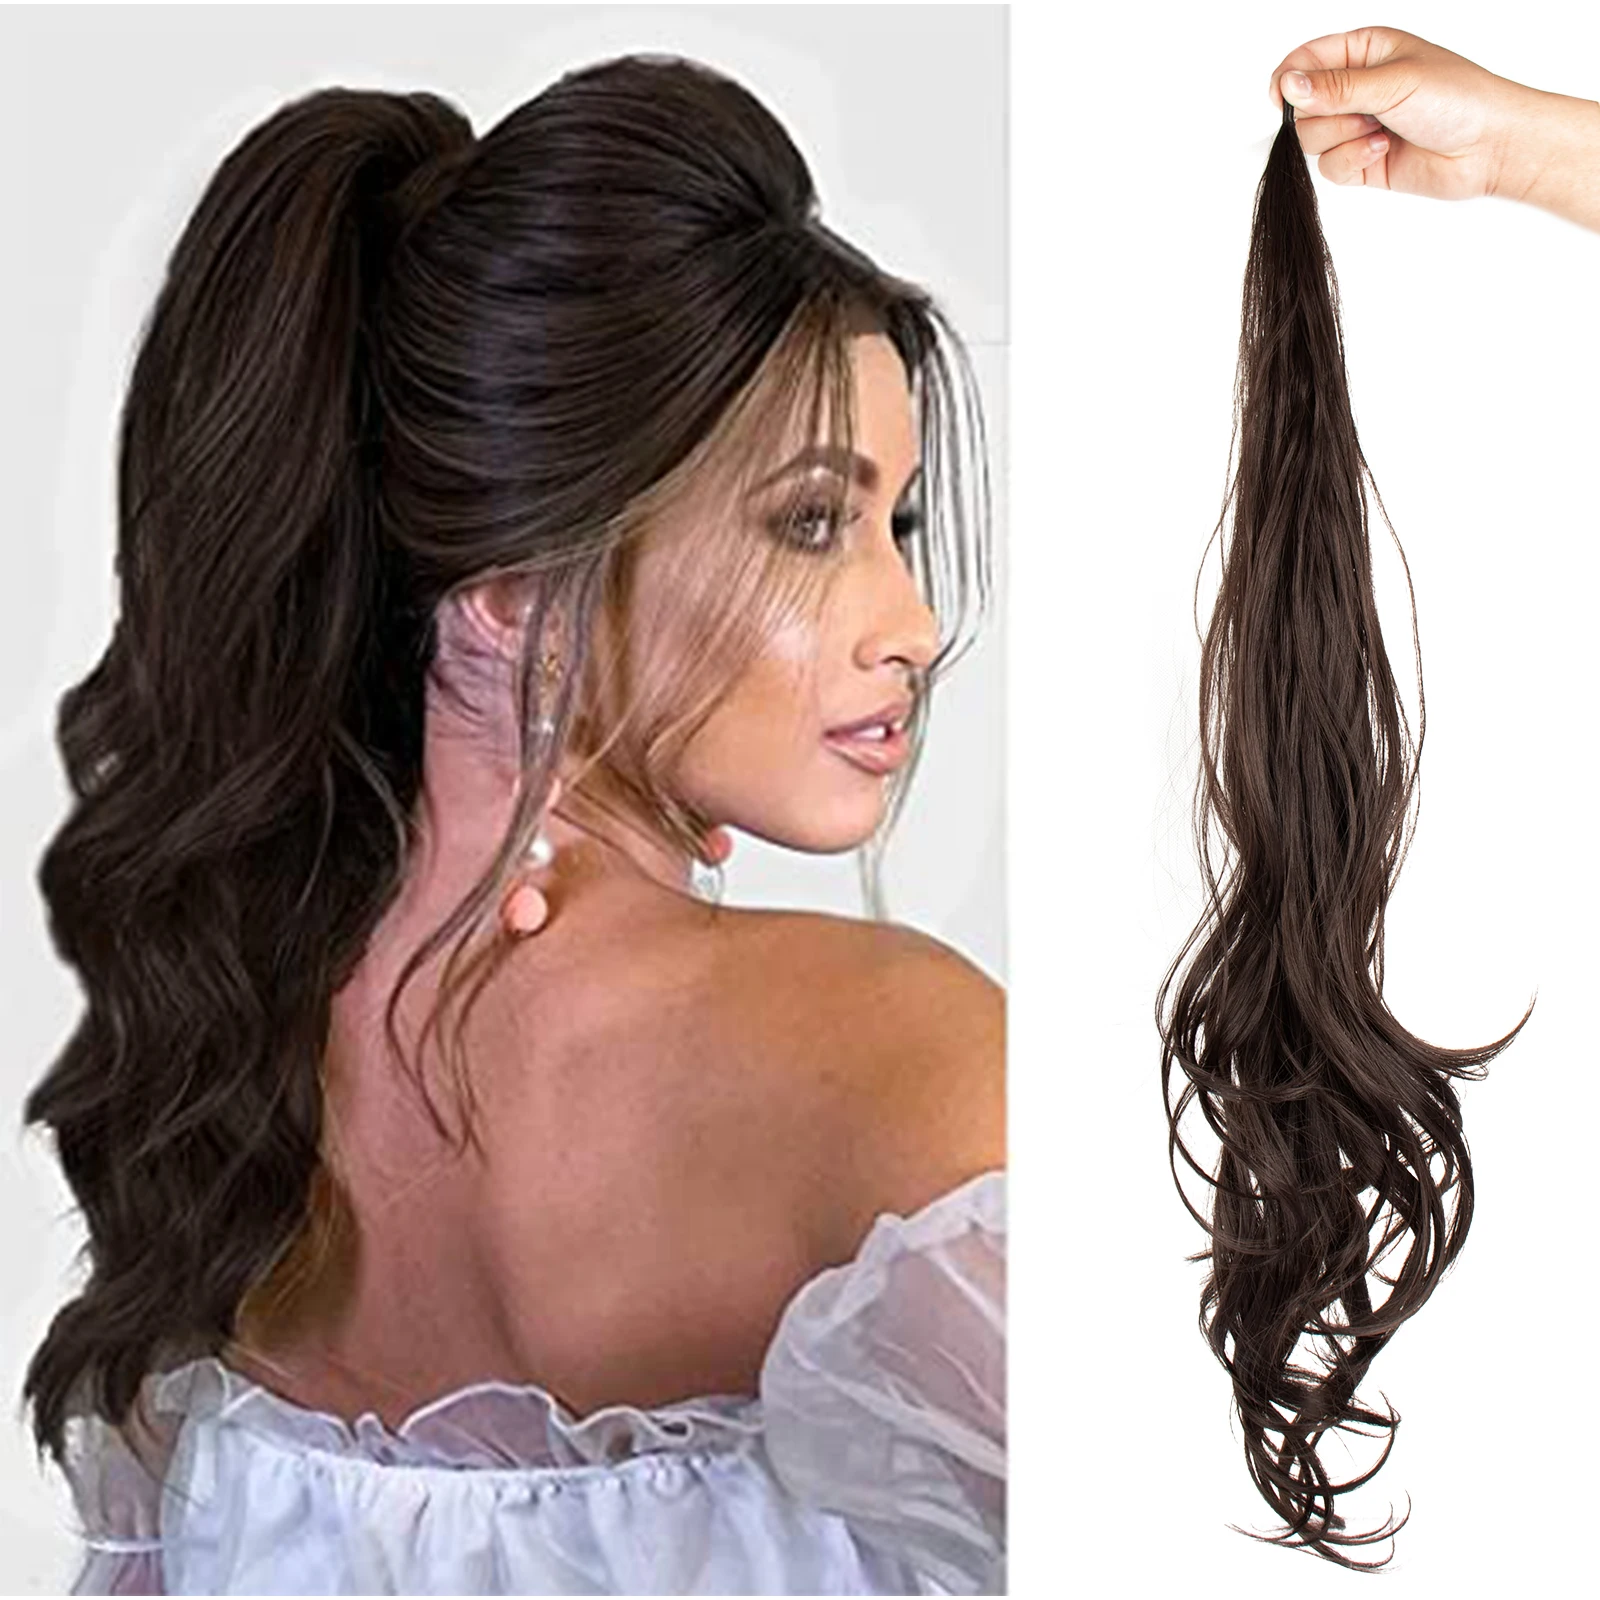 Ponytail Extension 32 Inch Flexible Wrap Around Ponytail Hair Extensions Long Curly Synthetic Ponytail Wavy Pretty Hair